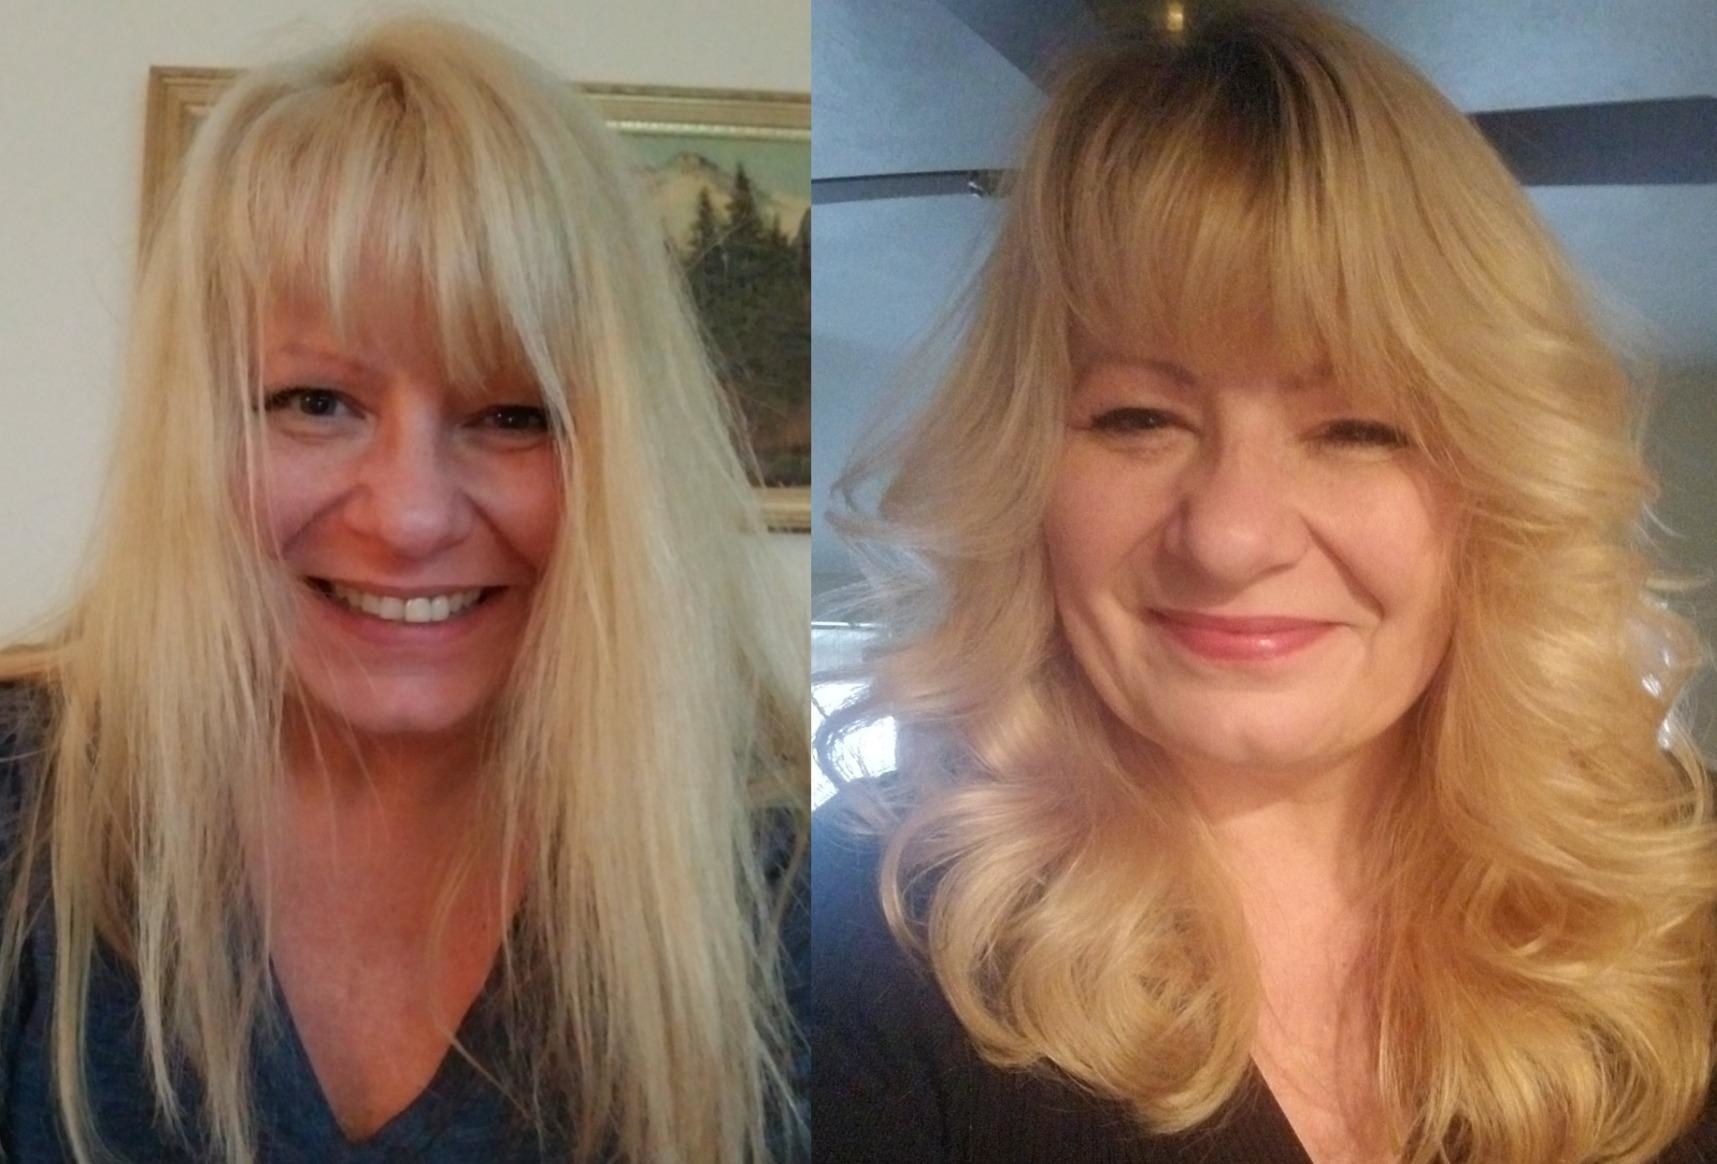 A reviewer: on the left with straight hair and on the right with shiny voluminous &#x27;70s style curls